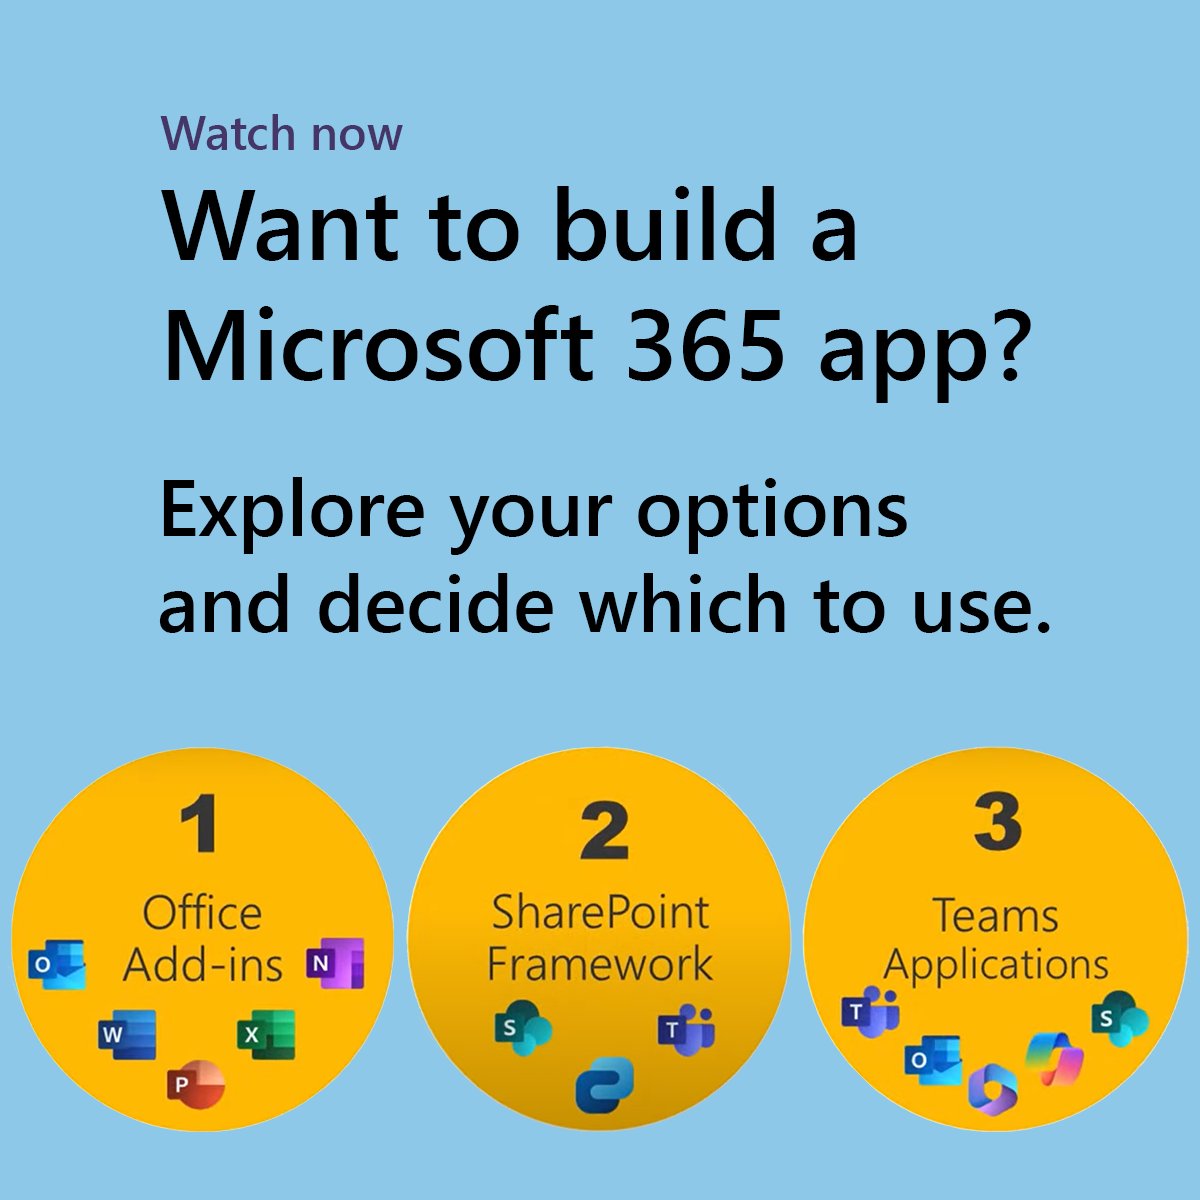 Want to build a Microsoft 365 app but don't know where to begin? With solutions ranging from Excel to #Copilot, #Microsoft365 development can be overwhelming. This short video series explains your options so you can decide which to use. msft.it/6019cNmcJ